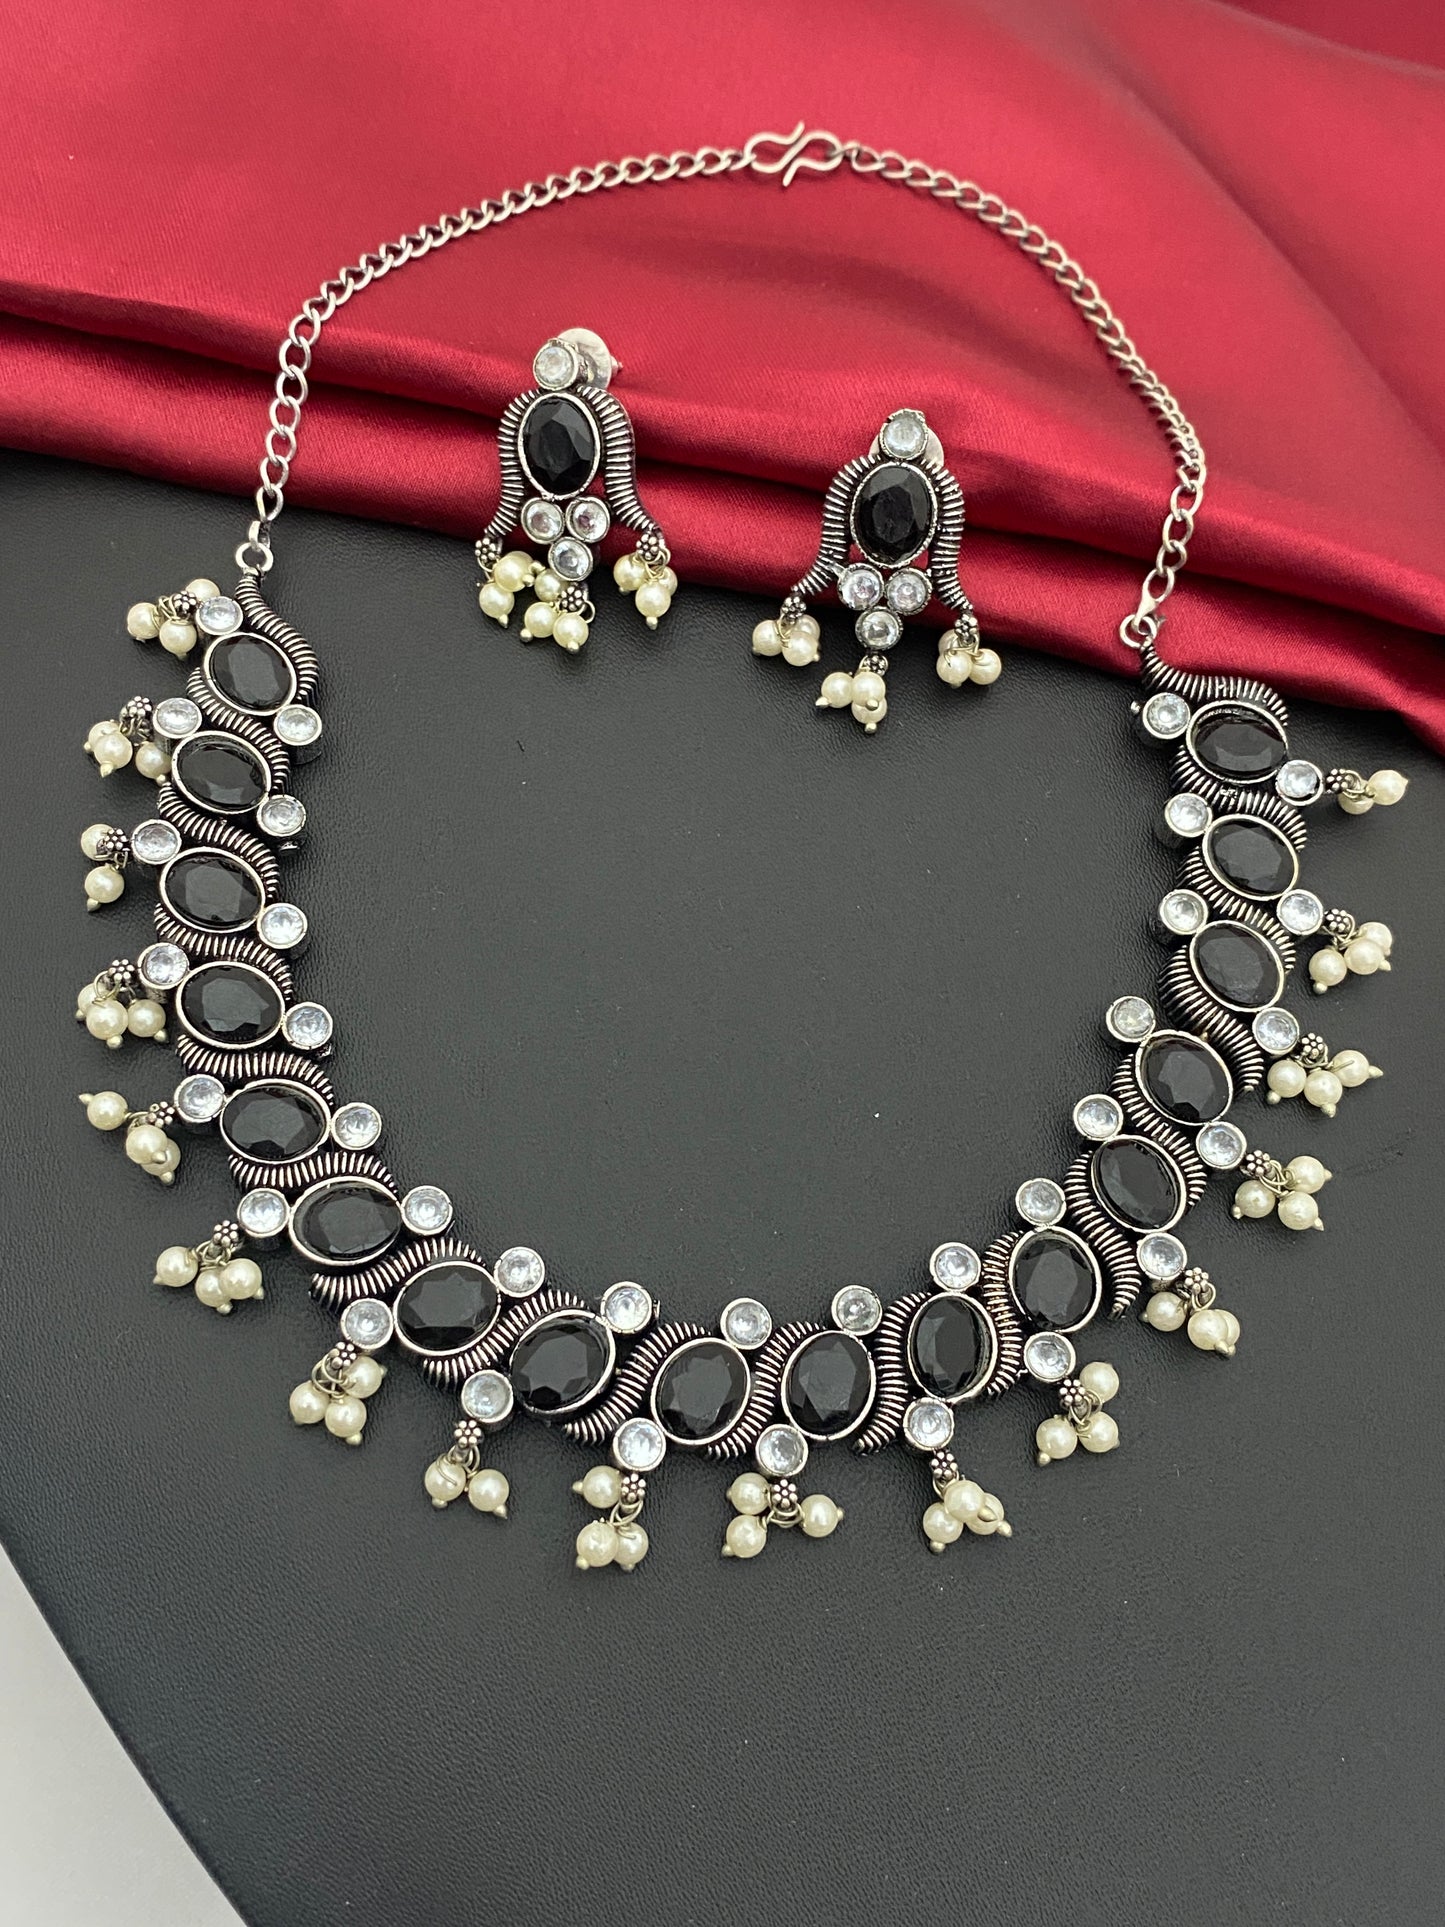 Oxidized Necklace With Earrings Sets In Flagstaff